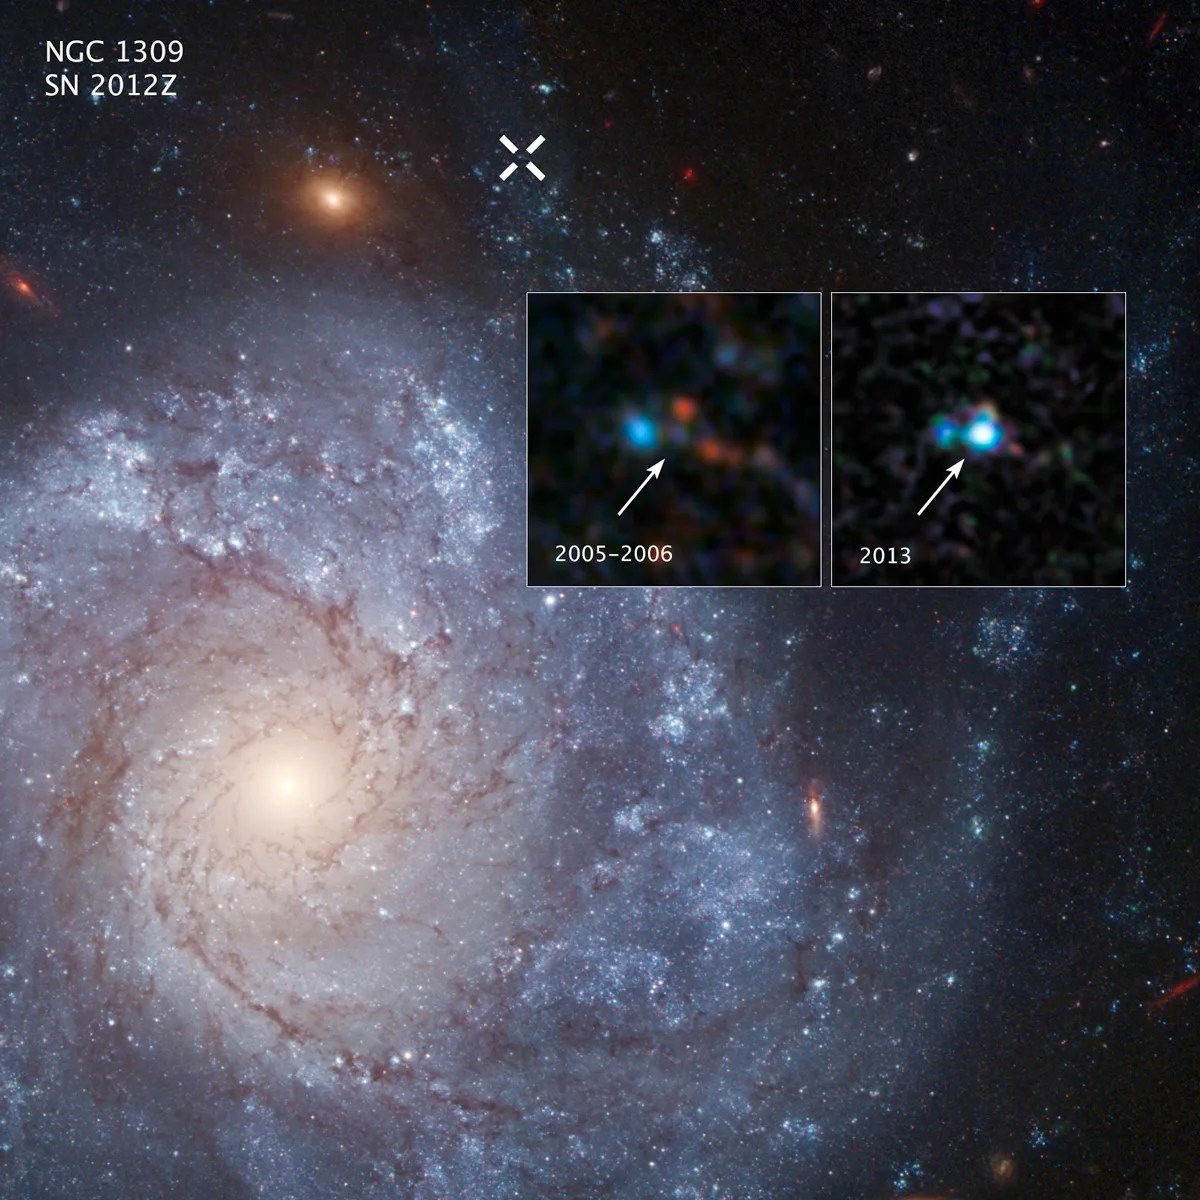 A blue-white spiral galaxy with pinkish-brown arms of gas and dust, showing two inset images comparing a supernova in 2005-2006 and 2013.